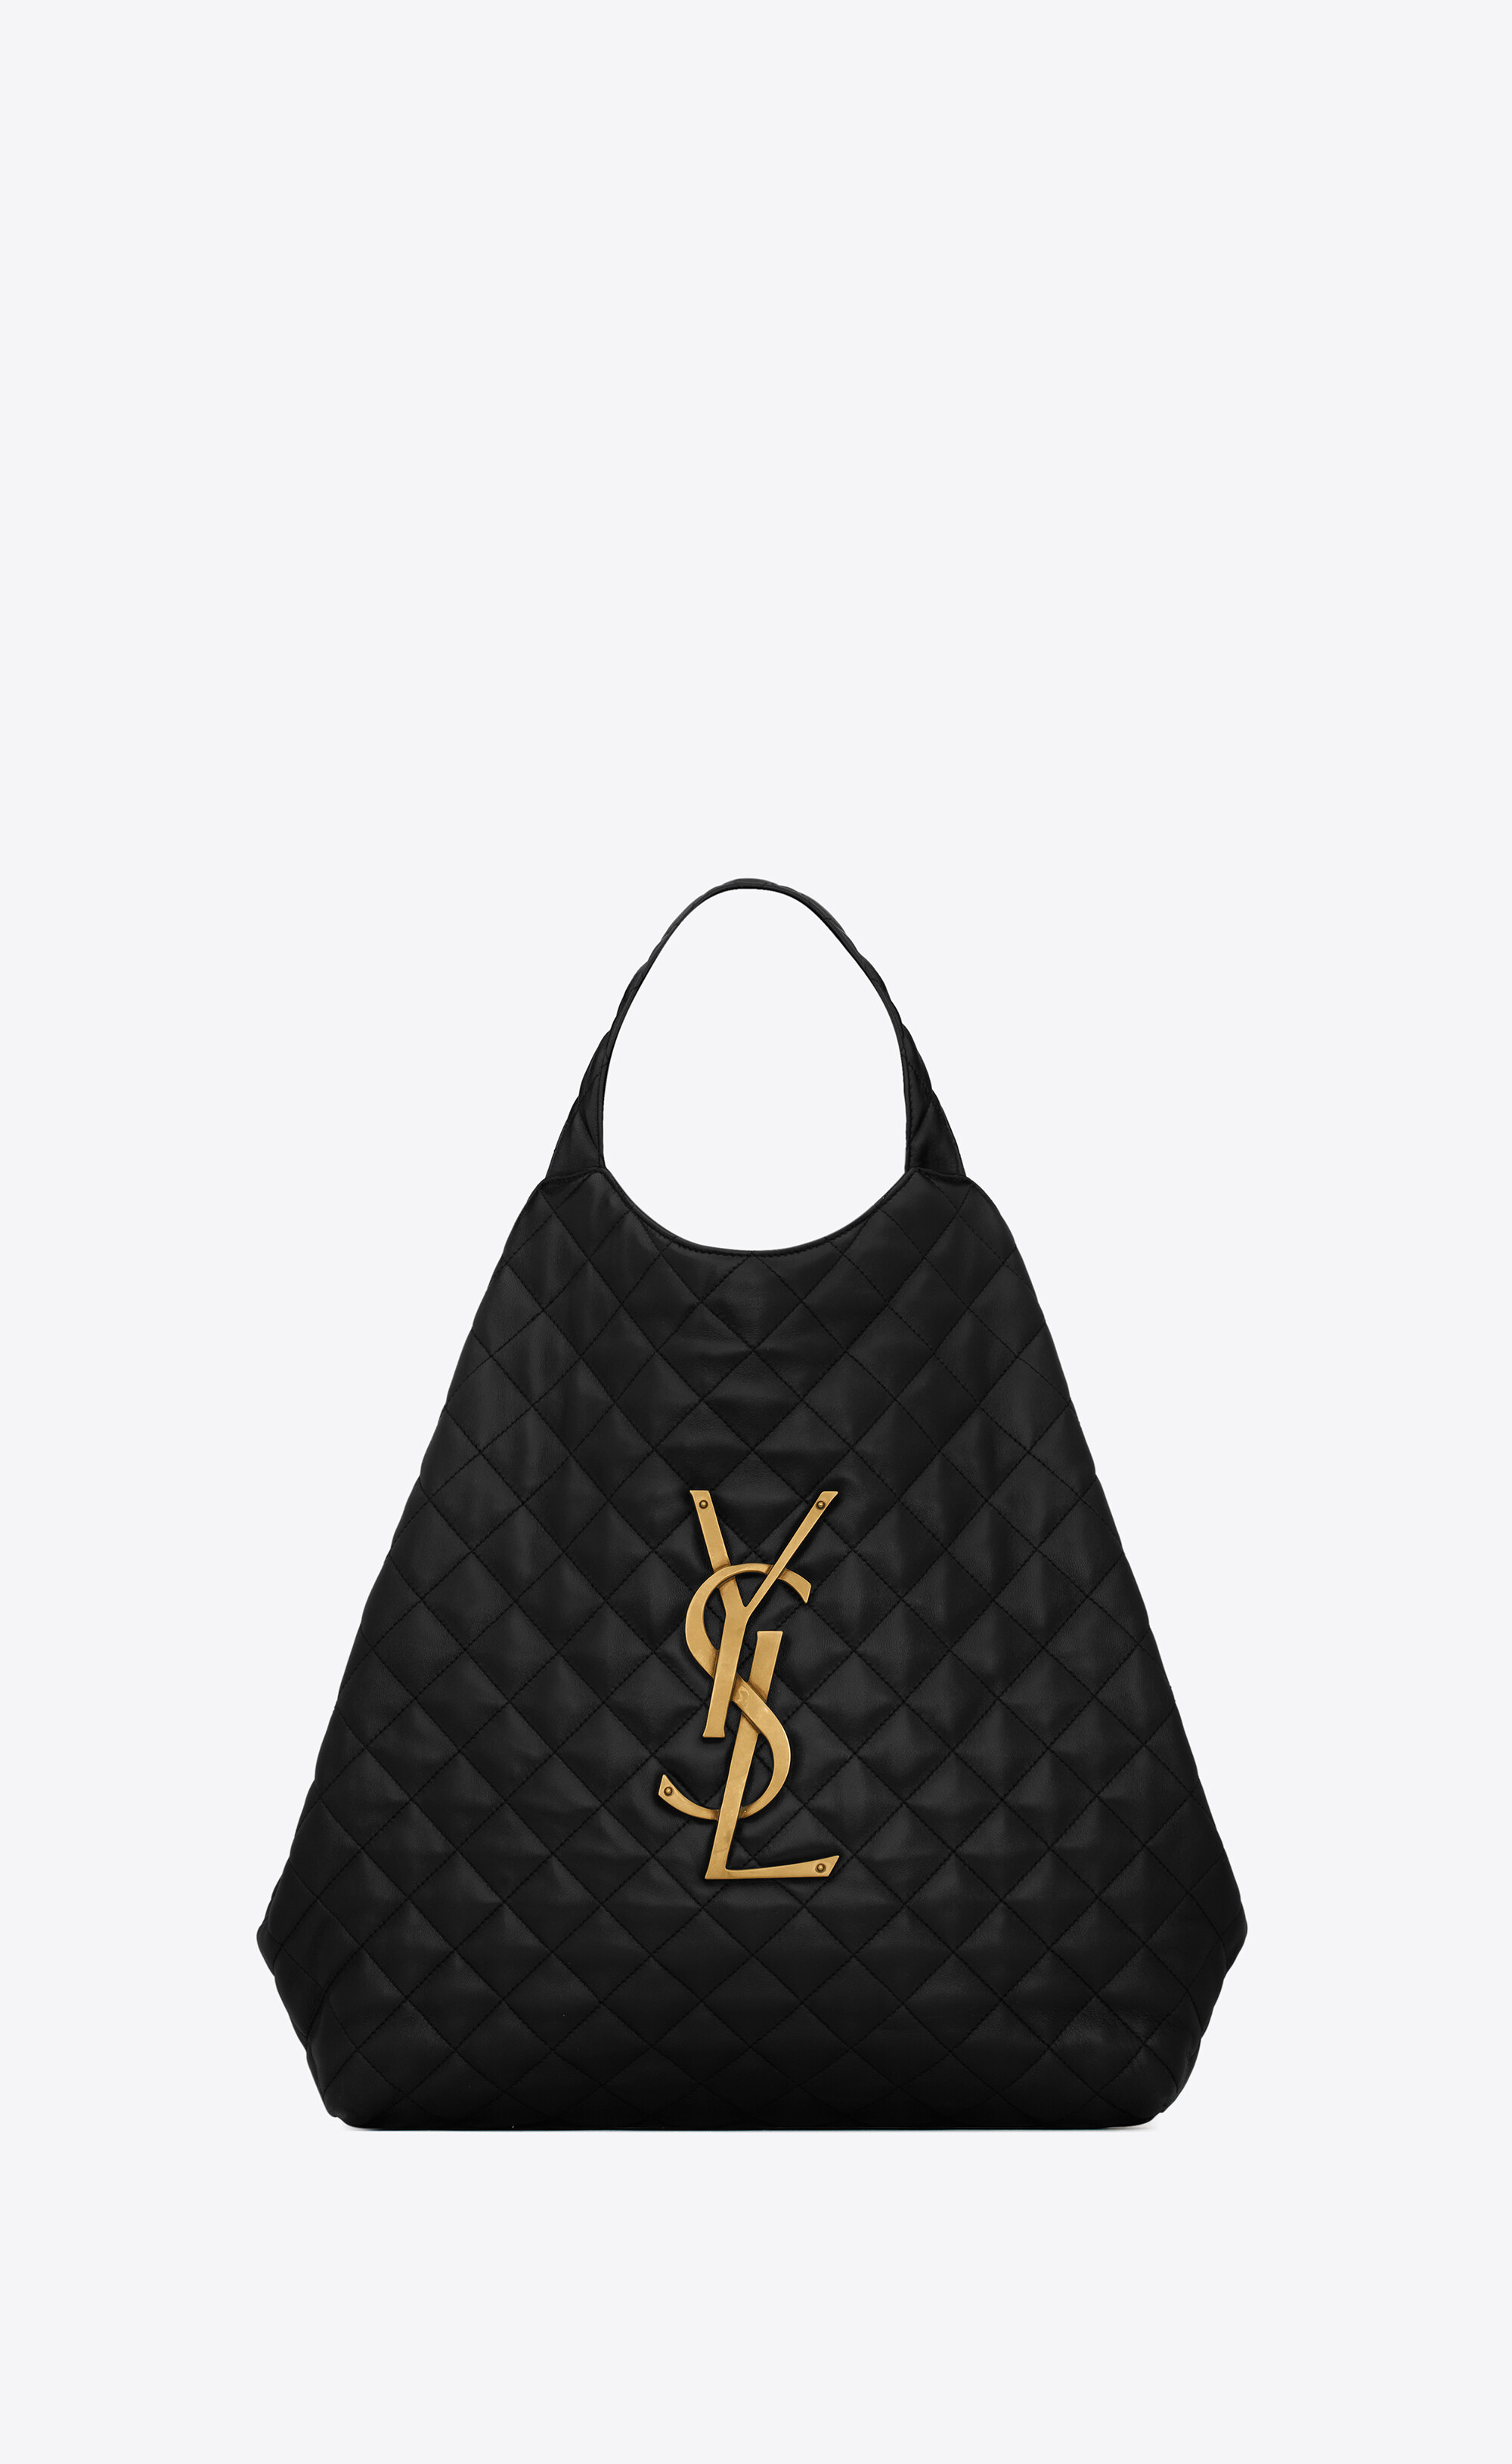 Which YSL is More Worth it